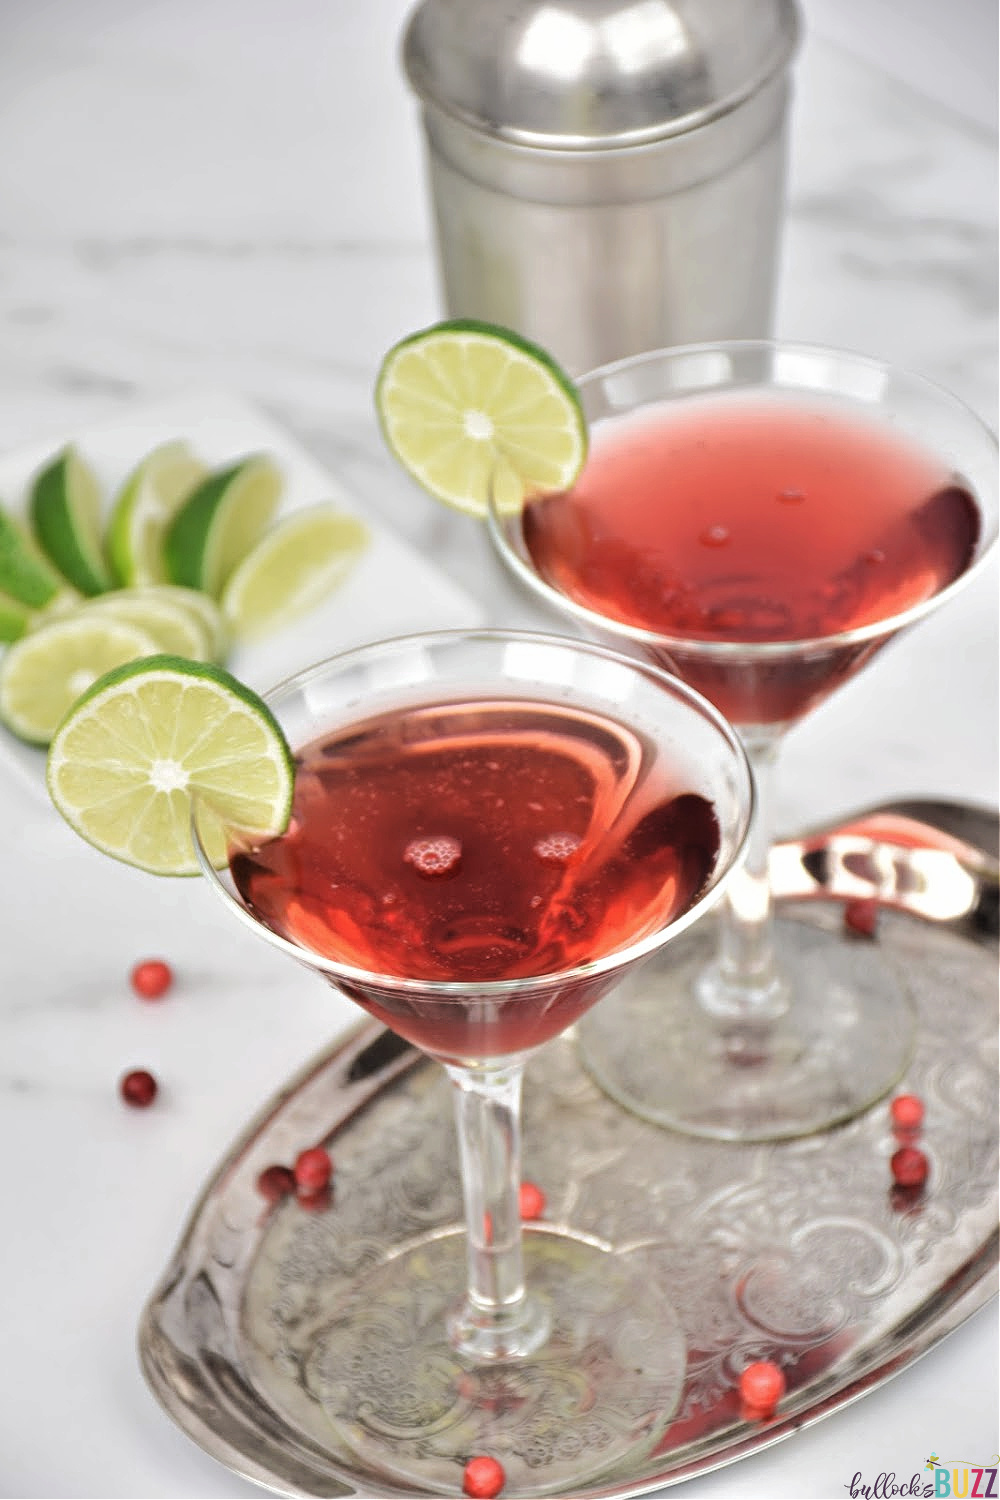 As far as as Southern Comfort cocktails go, this Scarlett O'Hara cocktail is defintely one of my favorites. I love the sweet and tangy mixture of cranberry and lime juice combined with the fruity sweetness of Southern Comfort liqueur. #cocktails #recipes